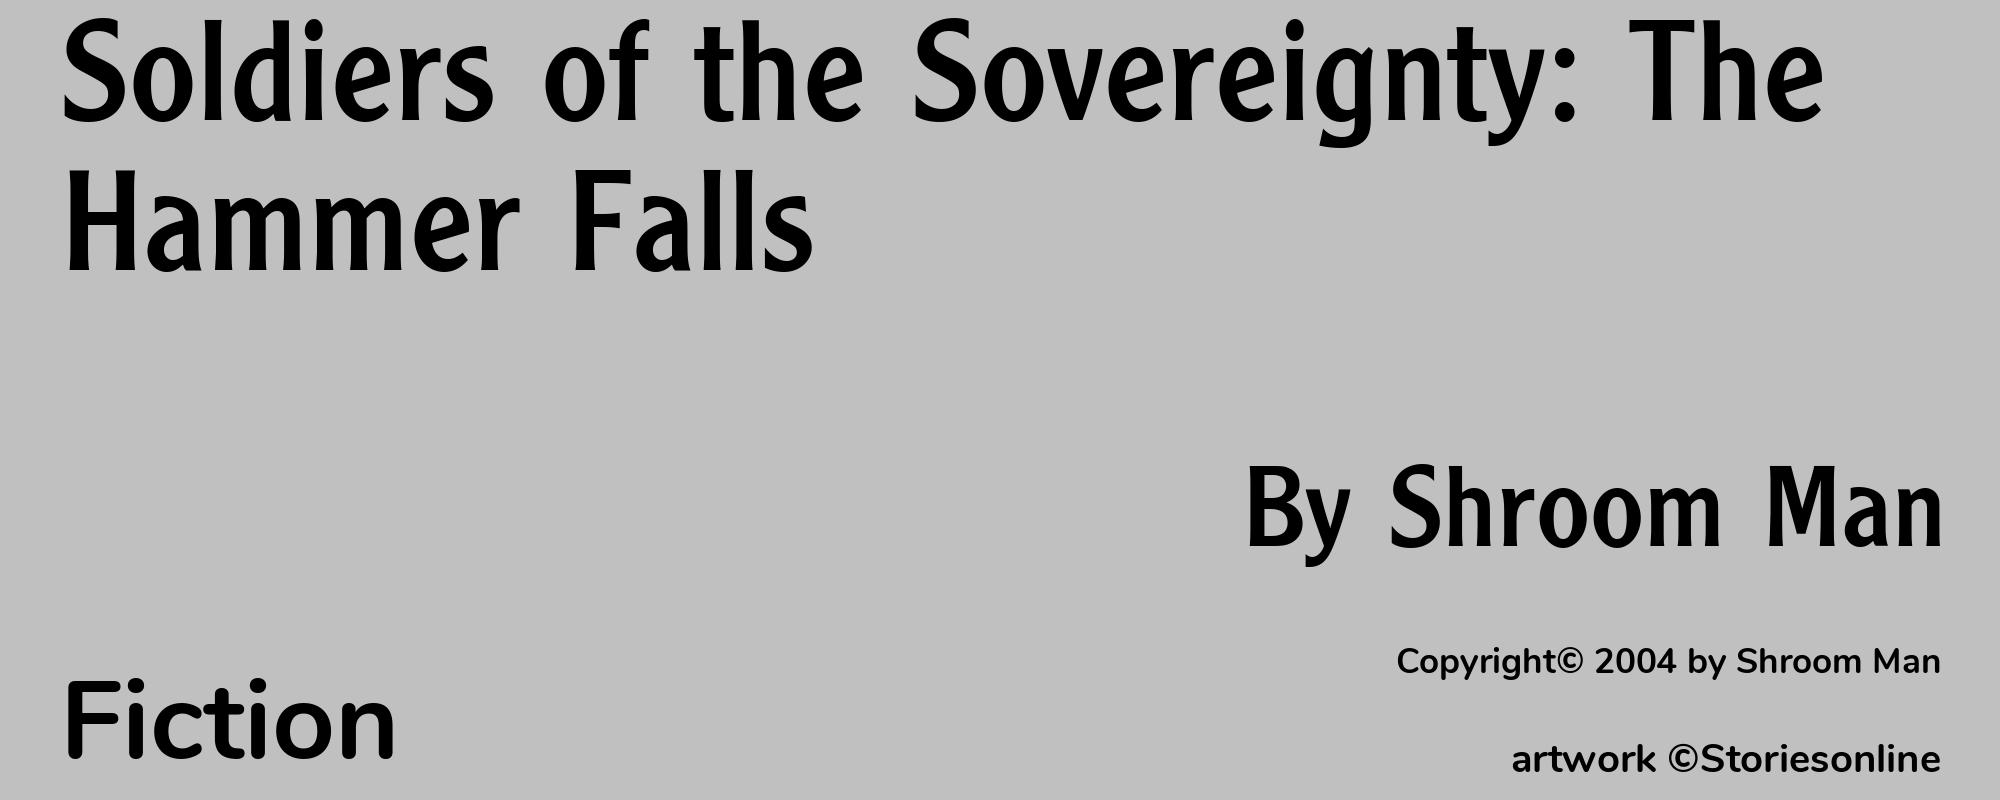 Soldiers of the Sovereignty: The Hammer Falls - Cover